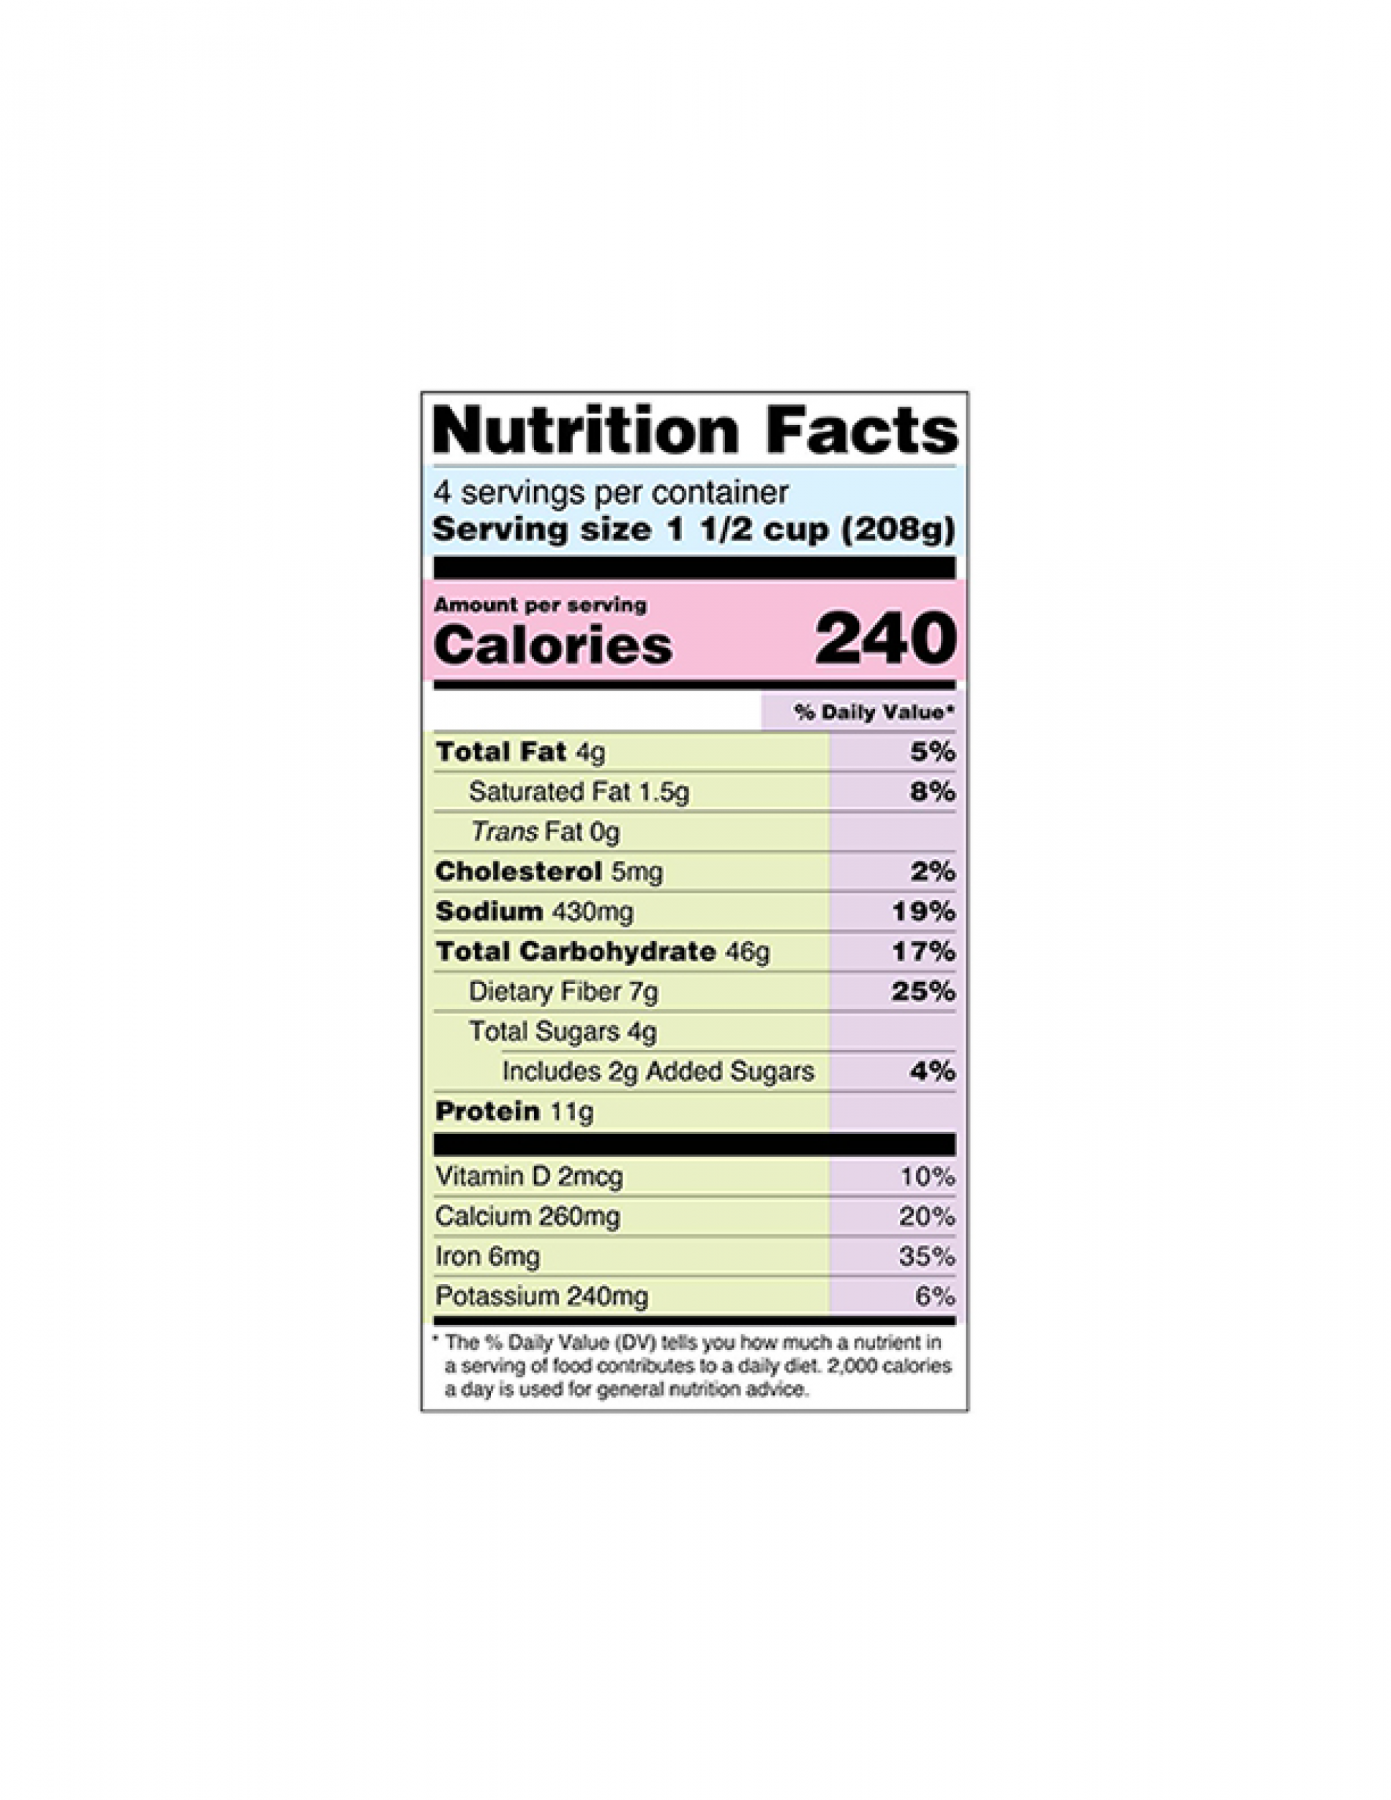 Are Your Nutrition Facts Labels In Compliance with the New Format?